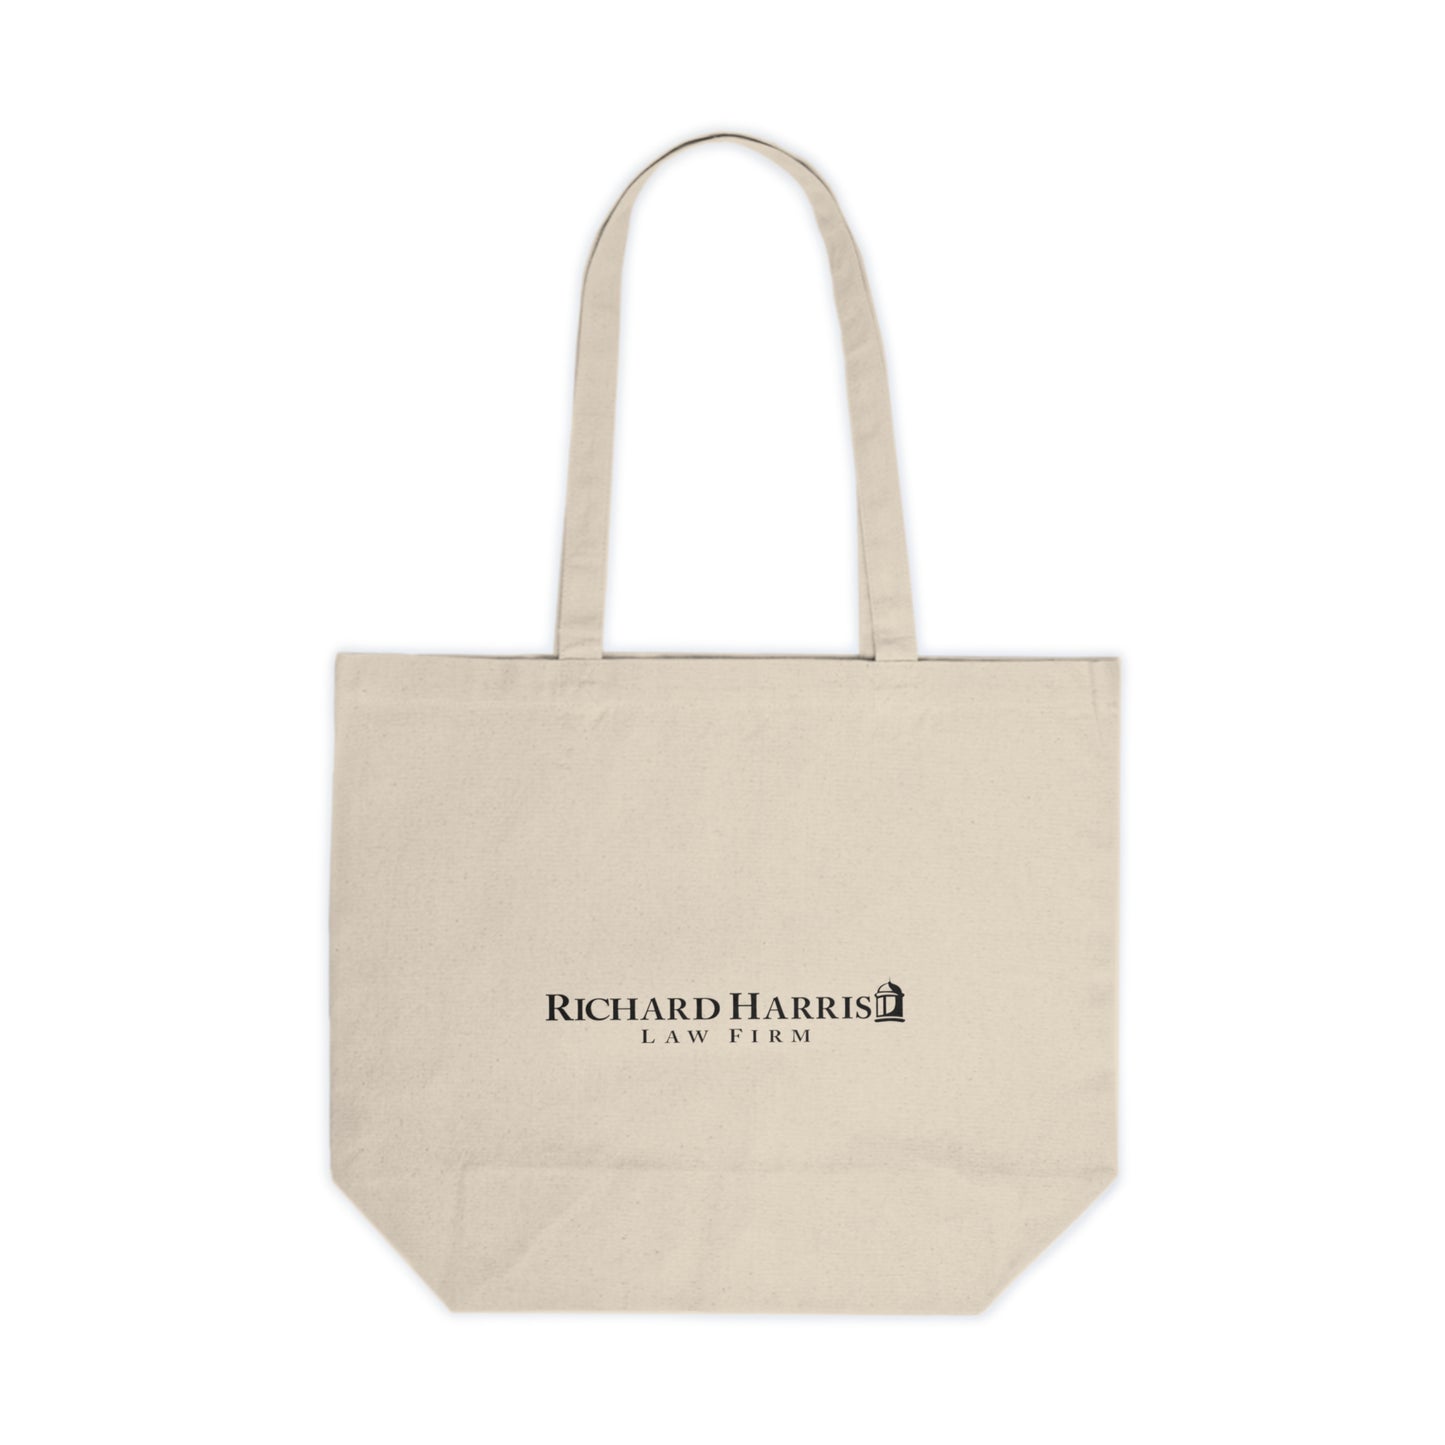 Spirit of Nevada Canvas Shopping Tote